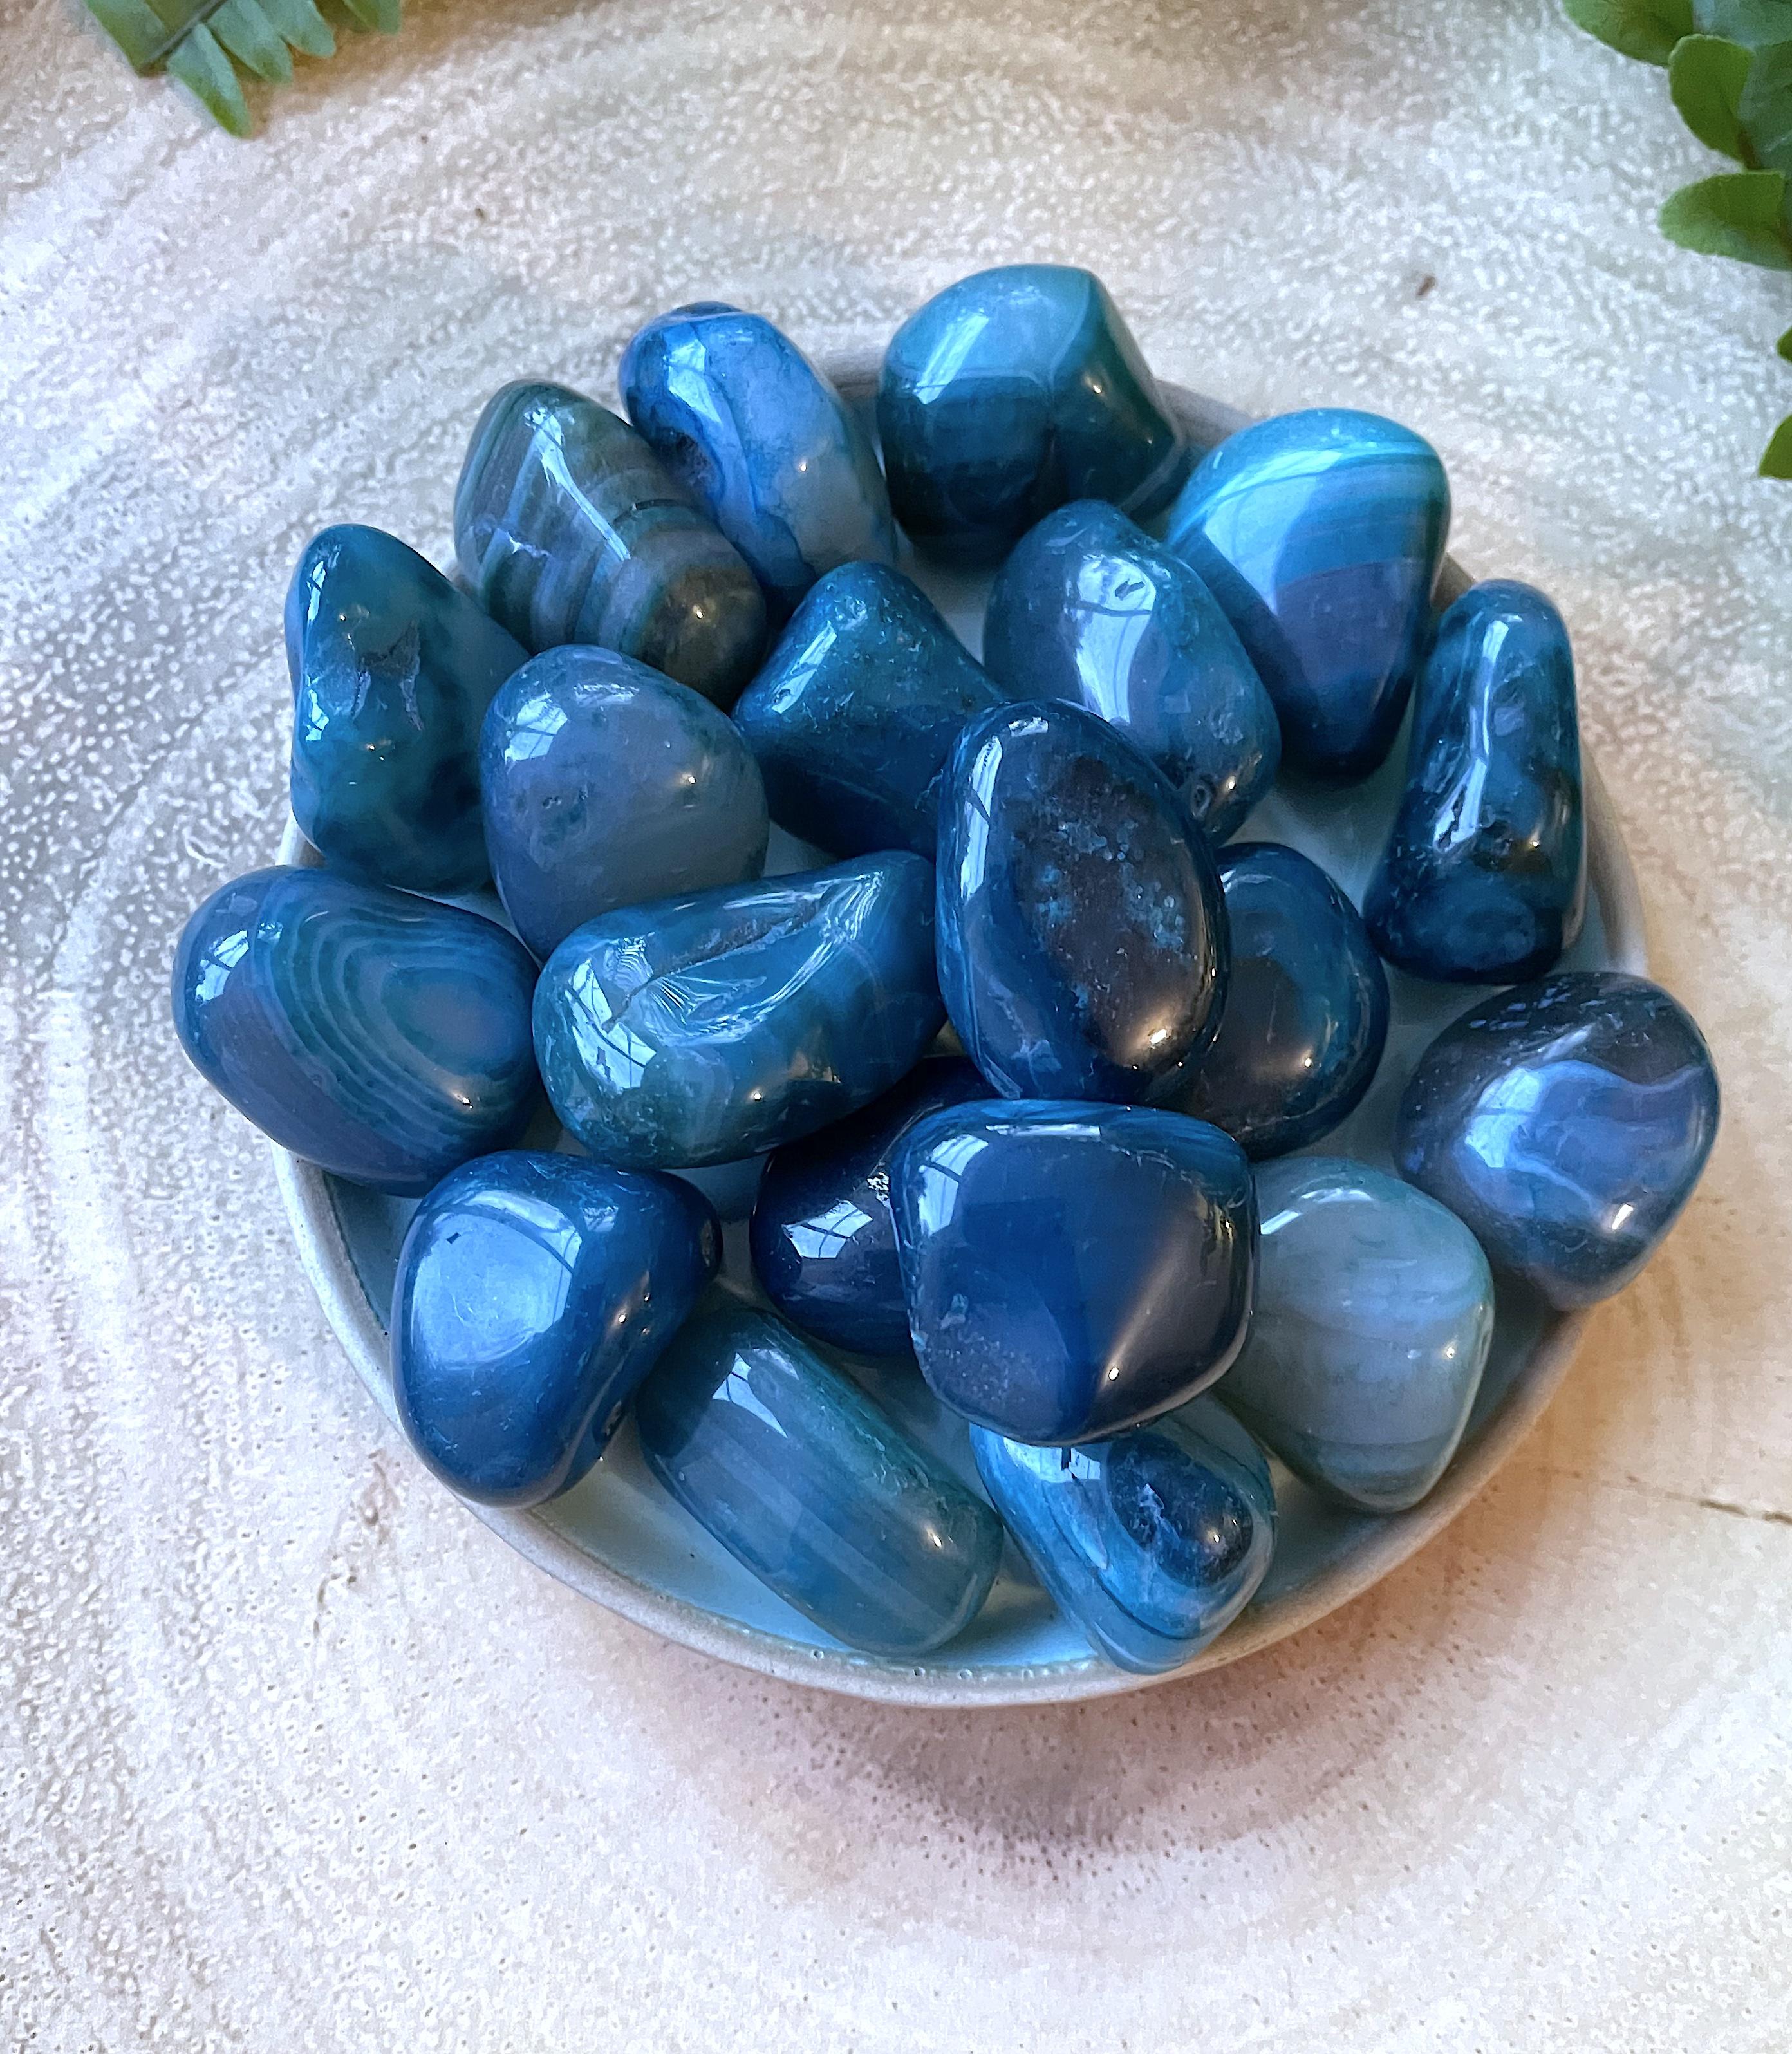 Blue Striped Banded Agate Crystal Healing Tumble Stone, The Holistic Hamper, online crystal shop UK